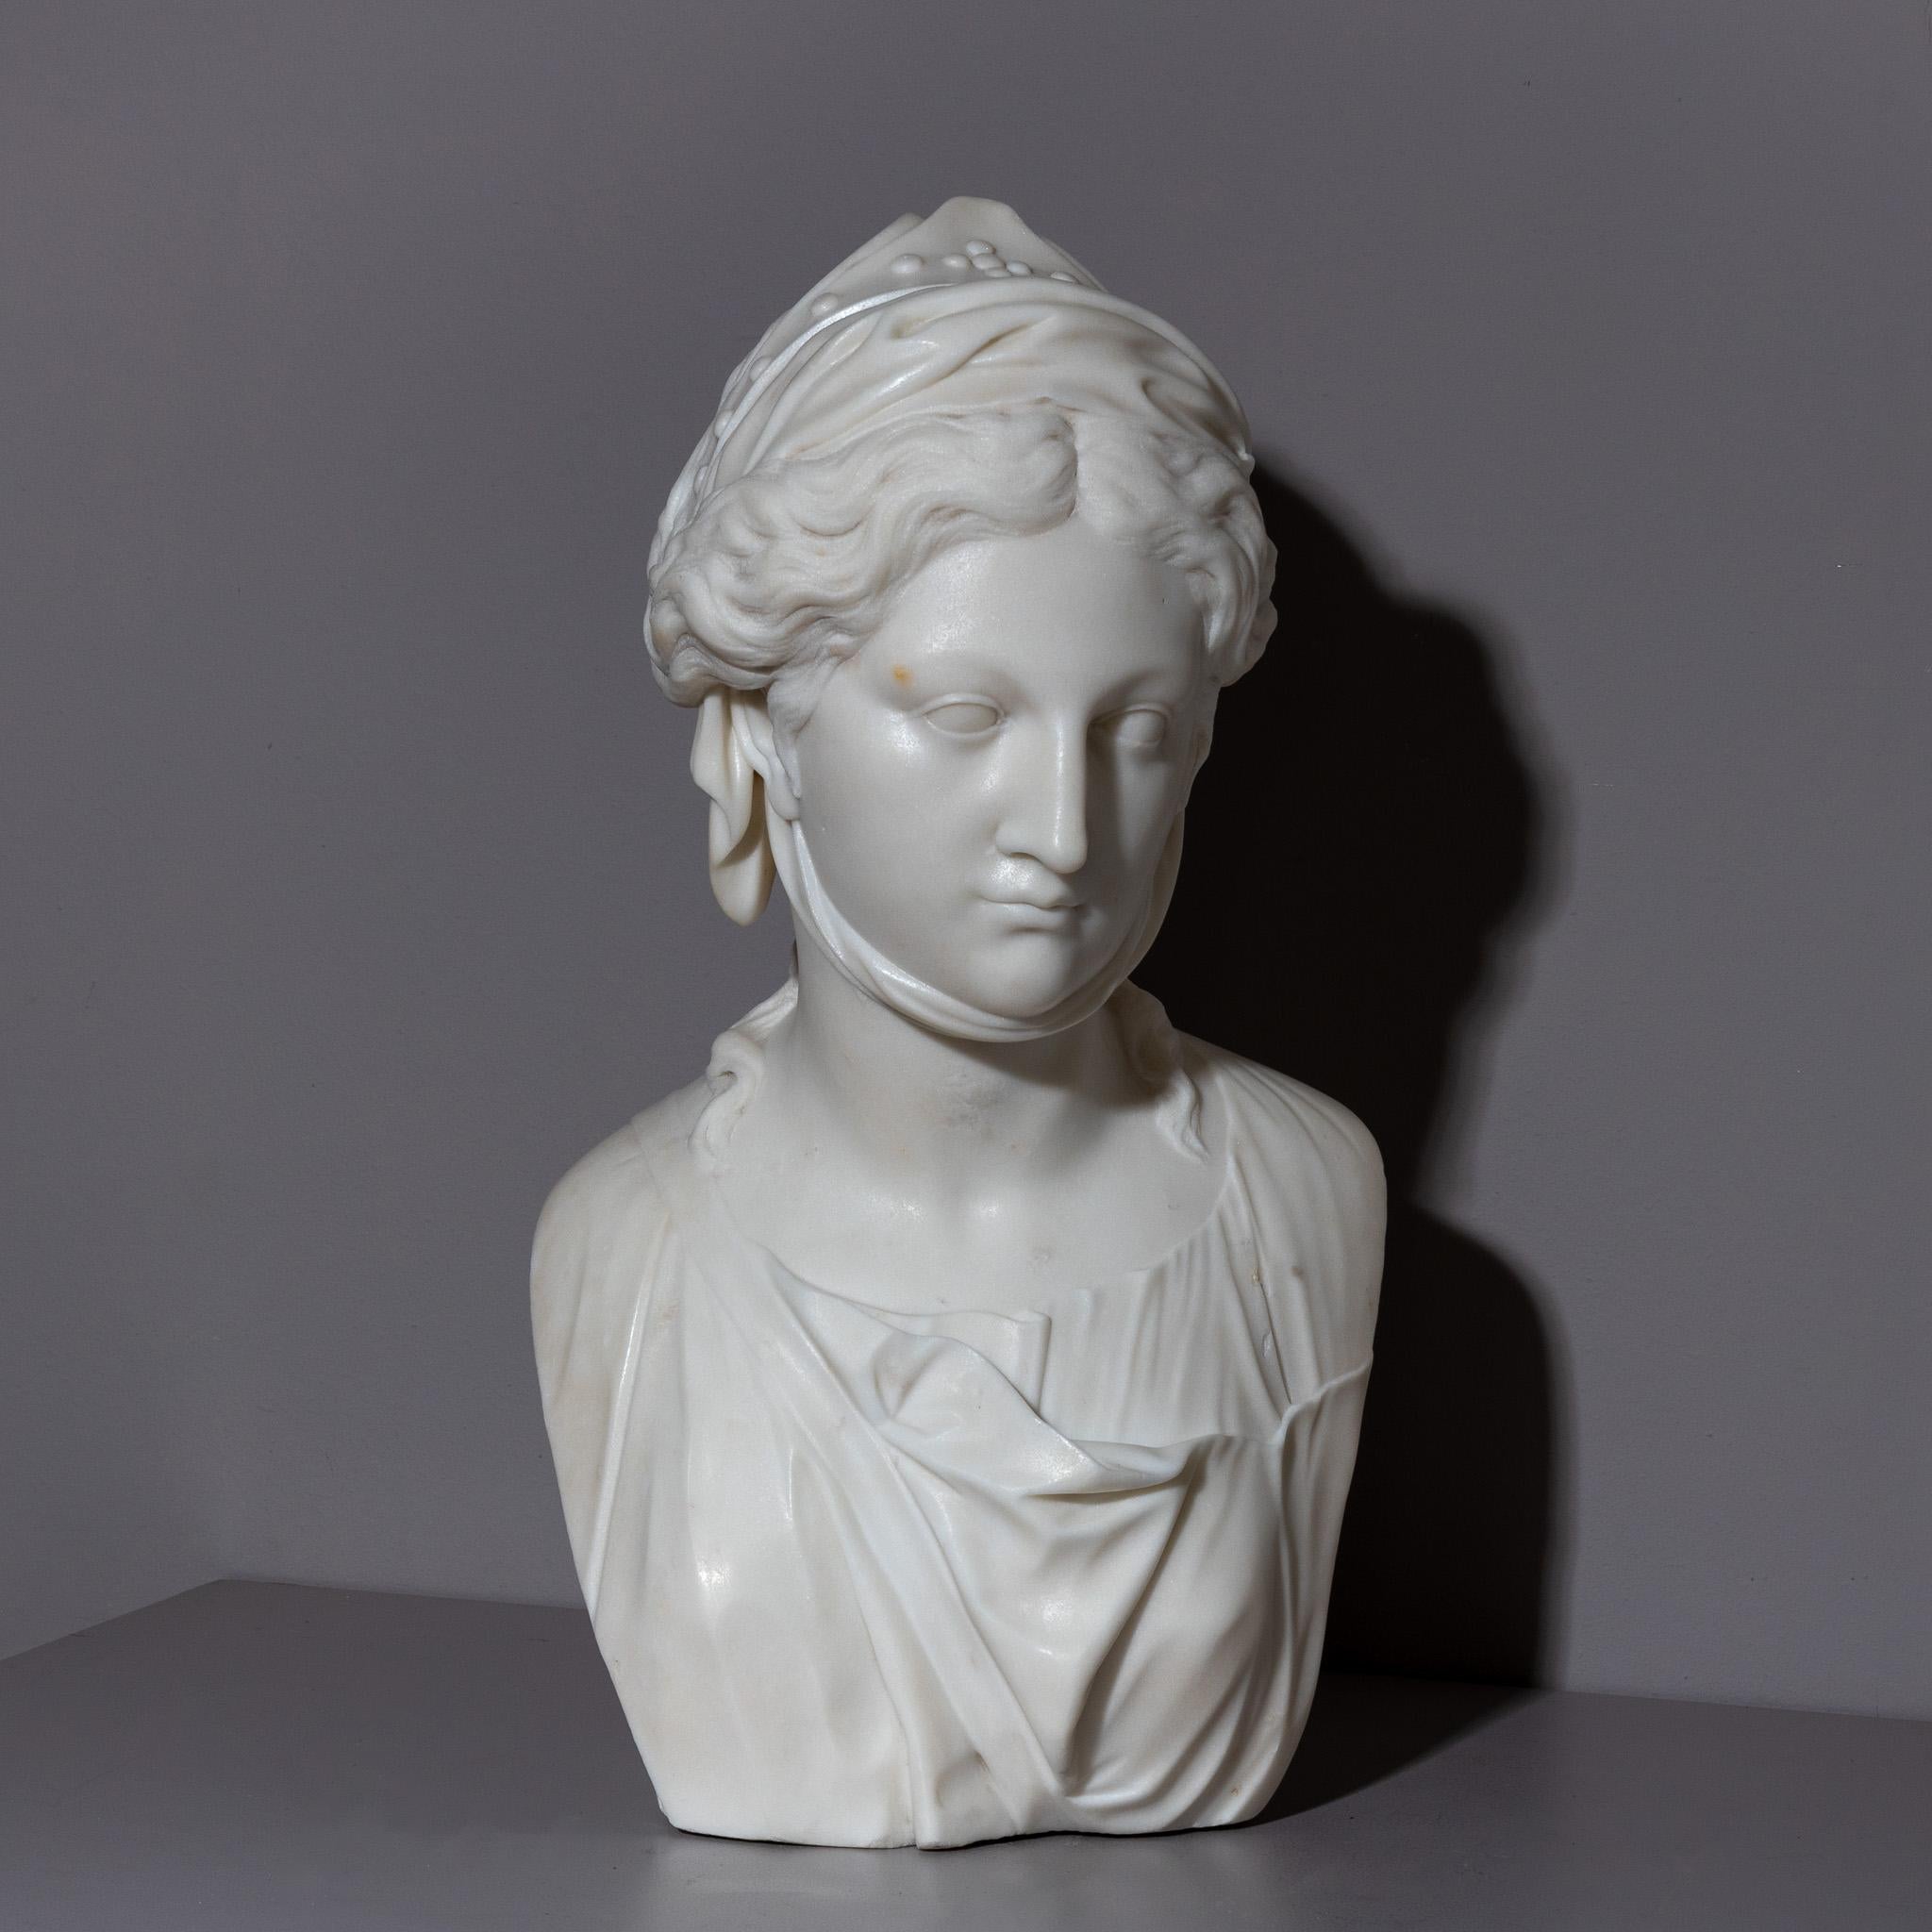 Bust of the Zingara or Fortune Teller, finely carved out of marble. The Zingara is depicted with a cloth tied around her chin, which wraps around her elaborately braided hair and ends in a small lace with dot decoration. She is dressed in a draped